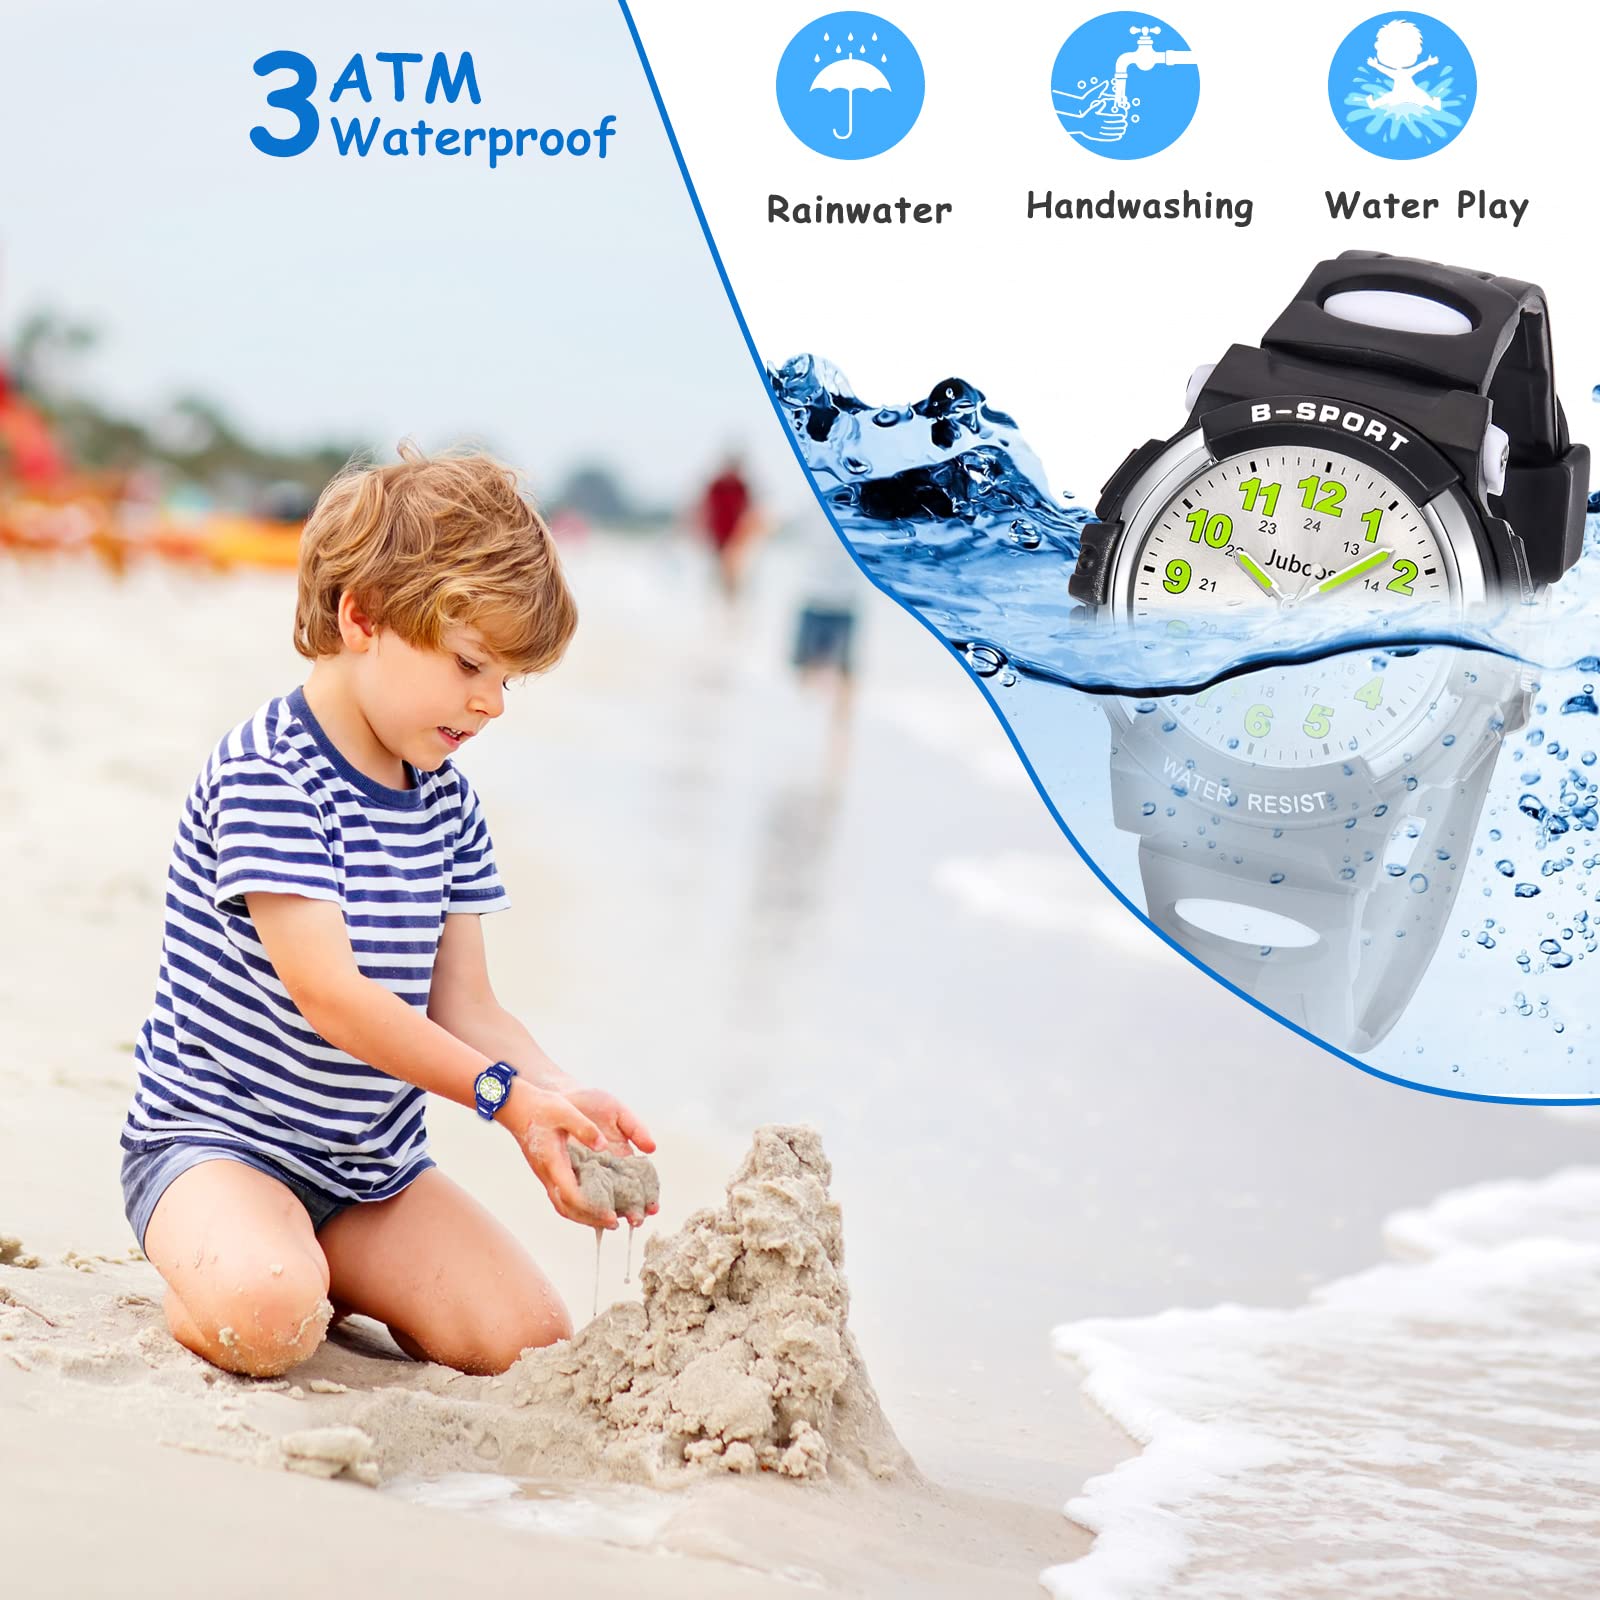 Kids Watch Analog, Child Waterproof Quartz Watch for 5-12 Years Old Boys Girls Time Teaching Sports Outdoor Wrist Watches,Kids Gifts